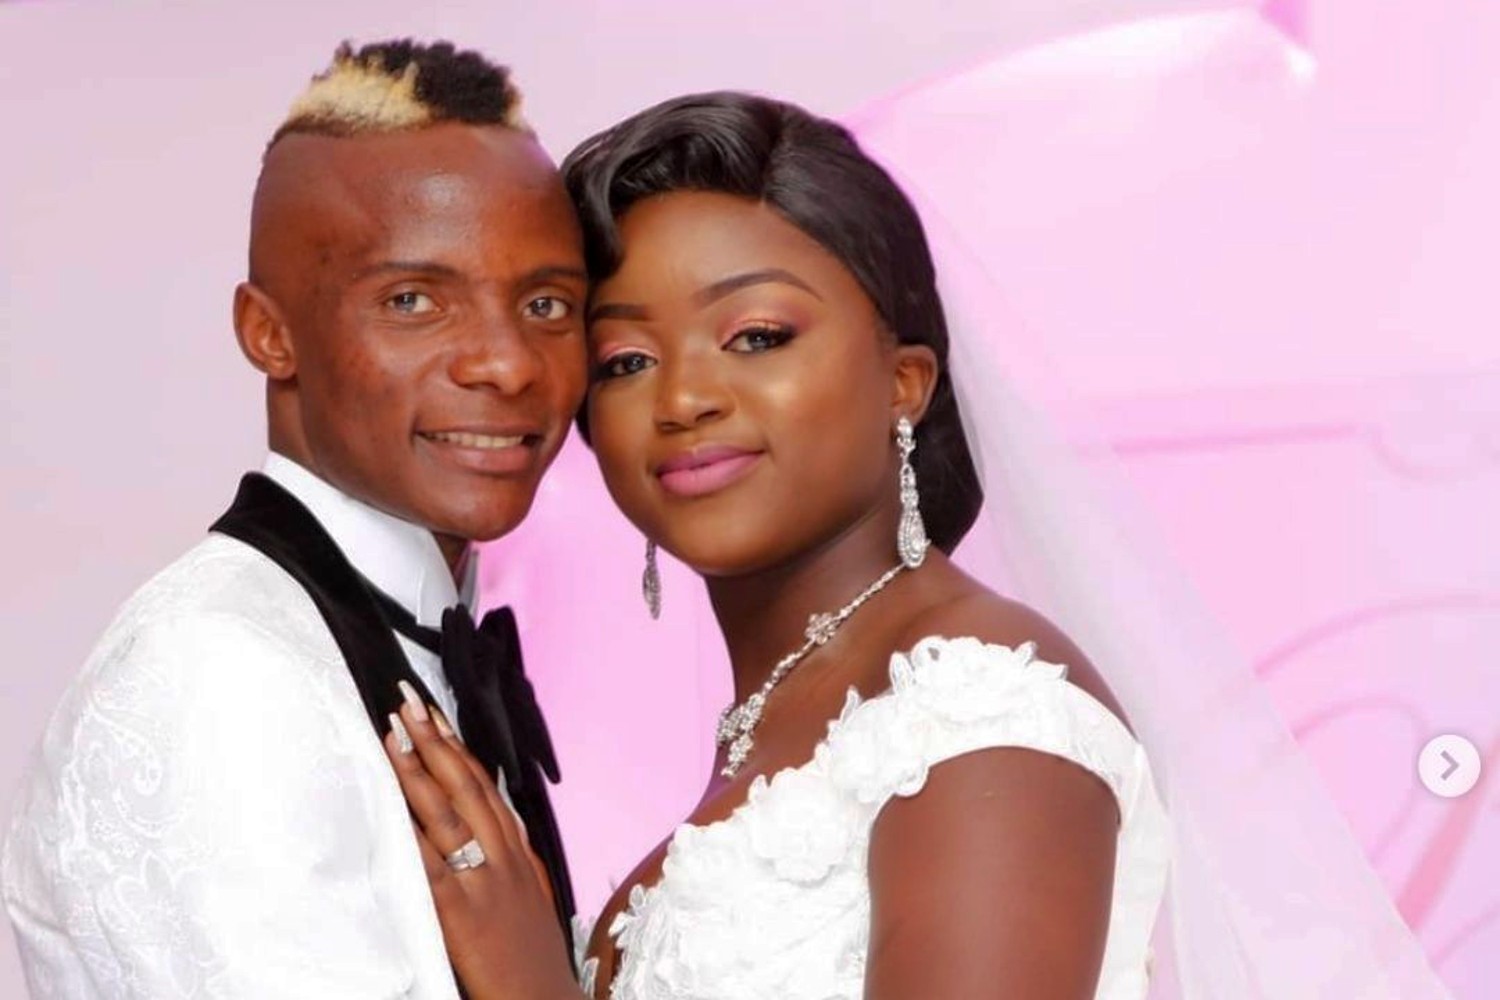 Kuda Mahachi’s Ex-Wife Demands R2.5 Million In Damages, Threatens To Have Him Deported From South Africa